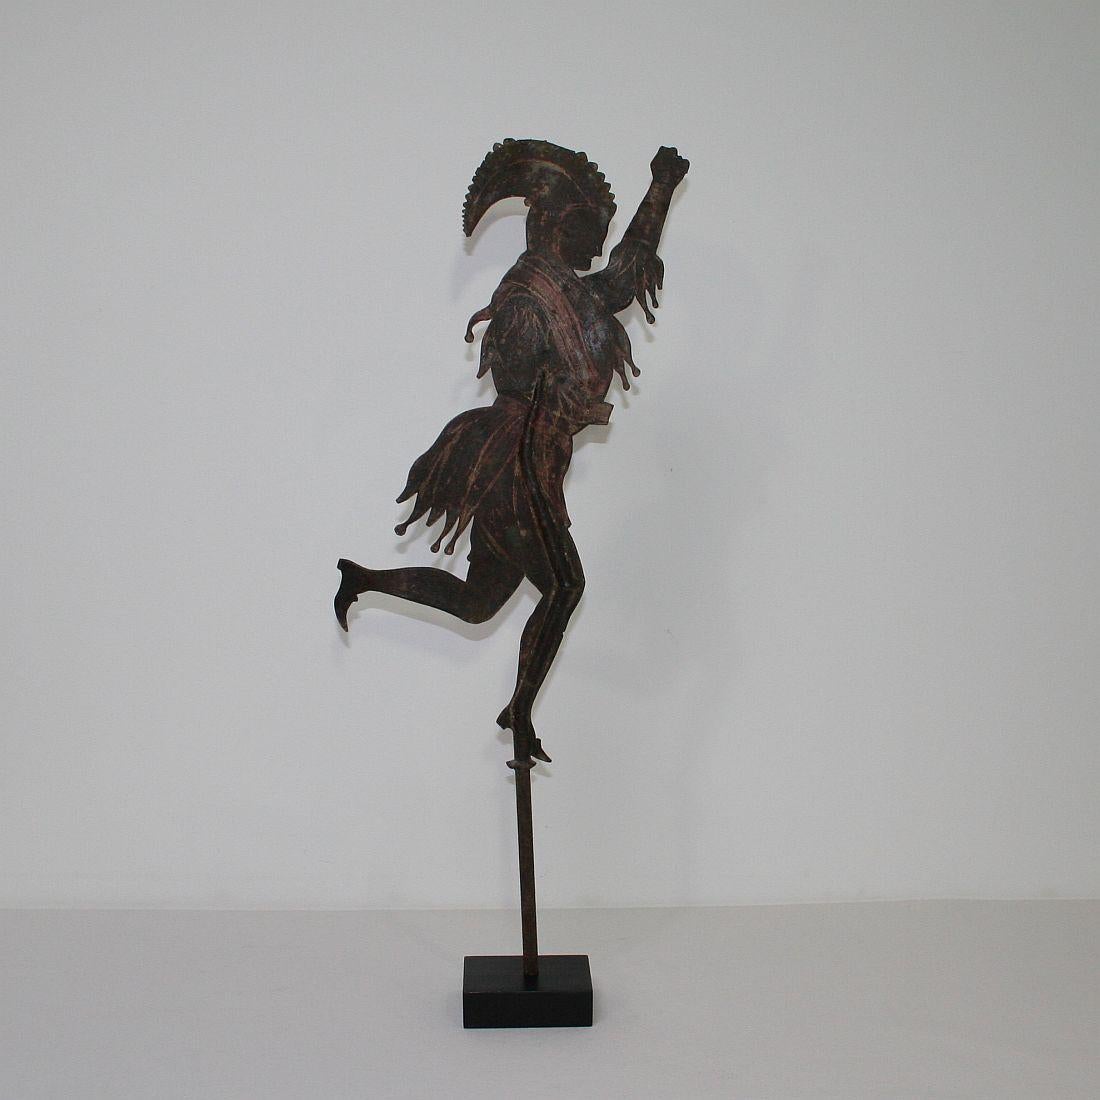 Unique hand forged iron weathervane representing a harlequin. Beautiful eyecatcher.
France, circa 1750-1800. Weathered and losses.
Measurement here below is inclusive the wooden base.